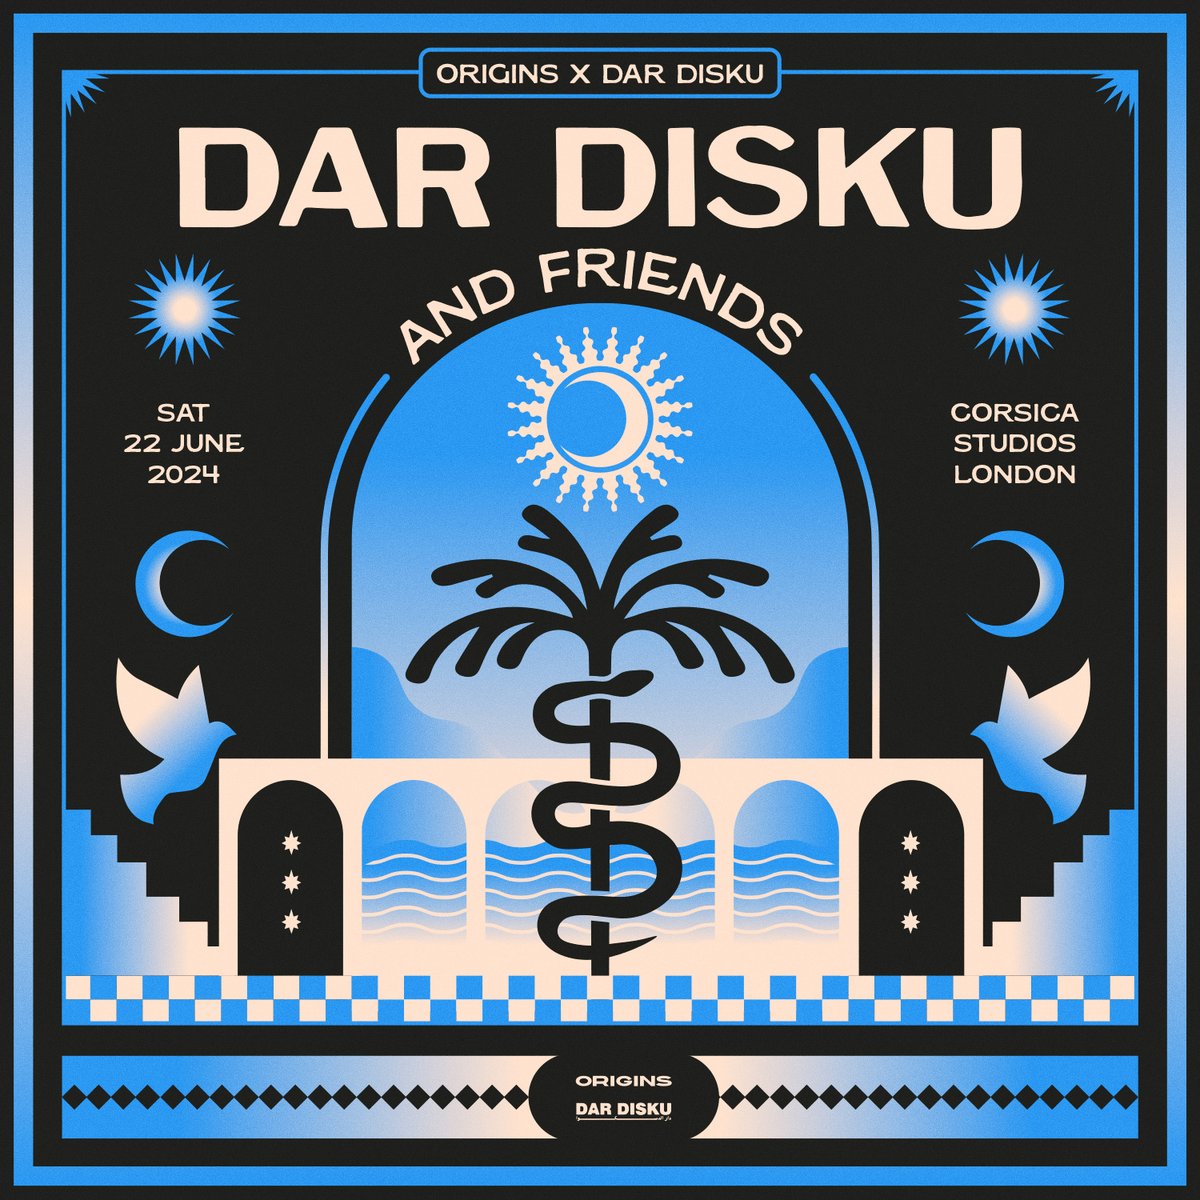 Tickets for the upcoming Origins x Dar Disku event this June are now on sale 🎟 → ra.co/events/1881081